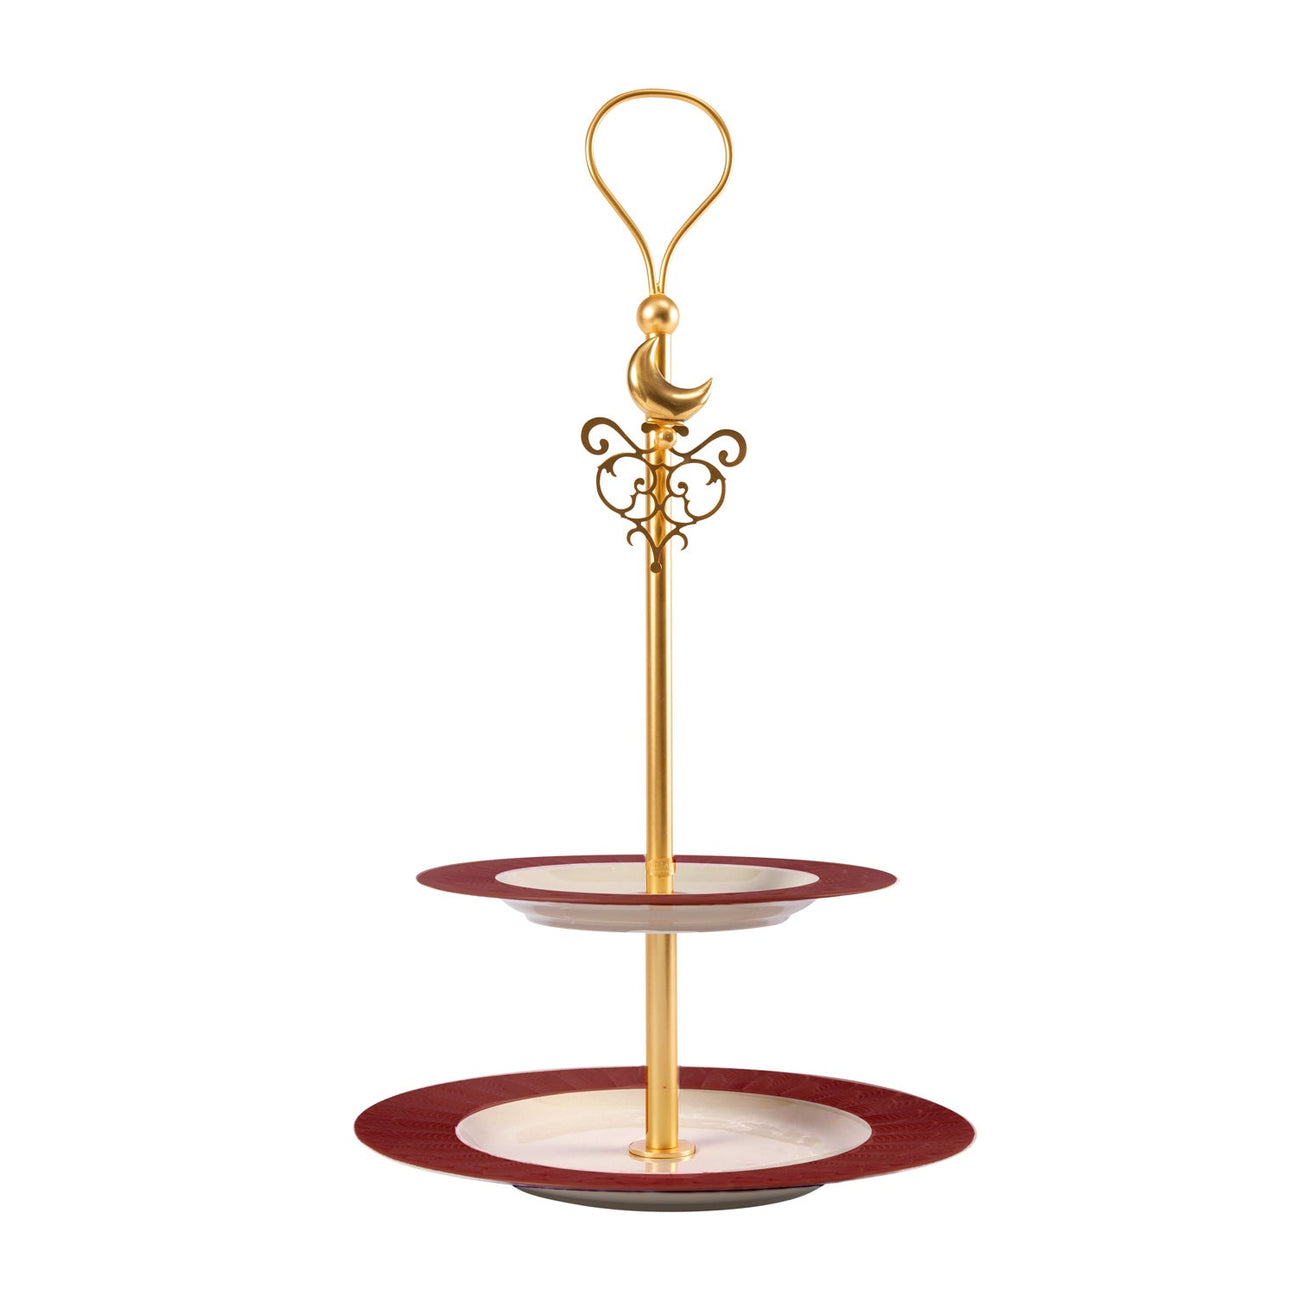 EXTRAVAGANZA - 2 Tier Cake Stand - Pearly Red 